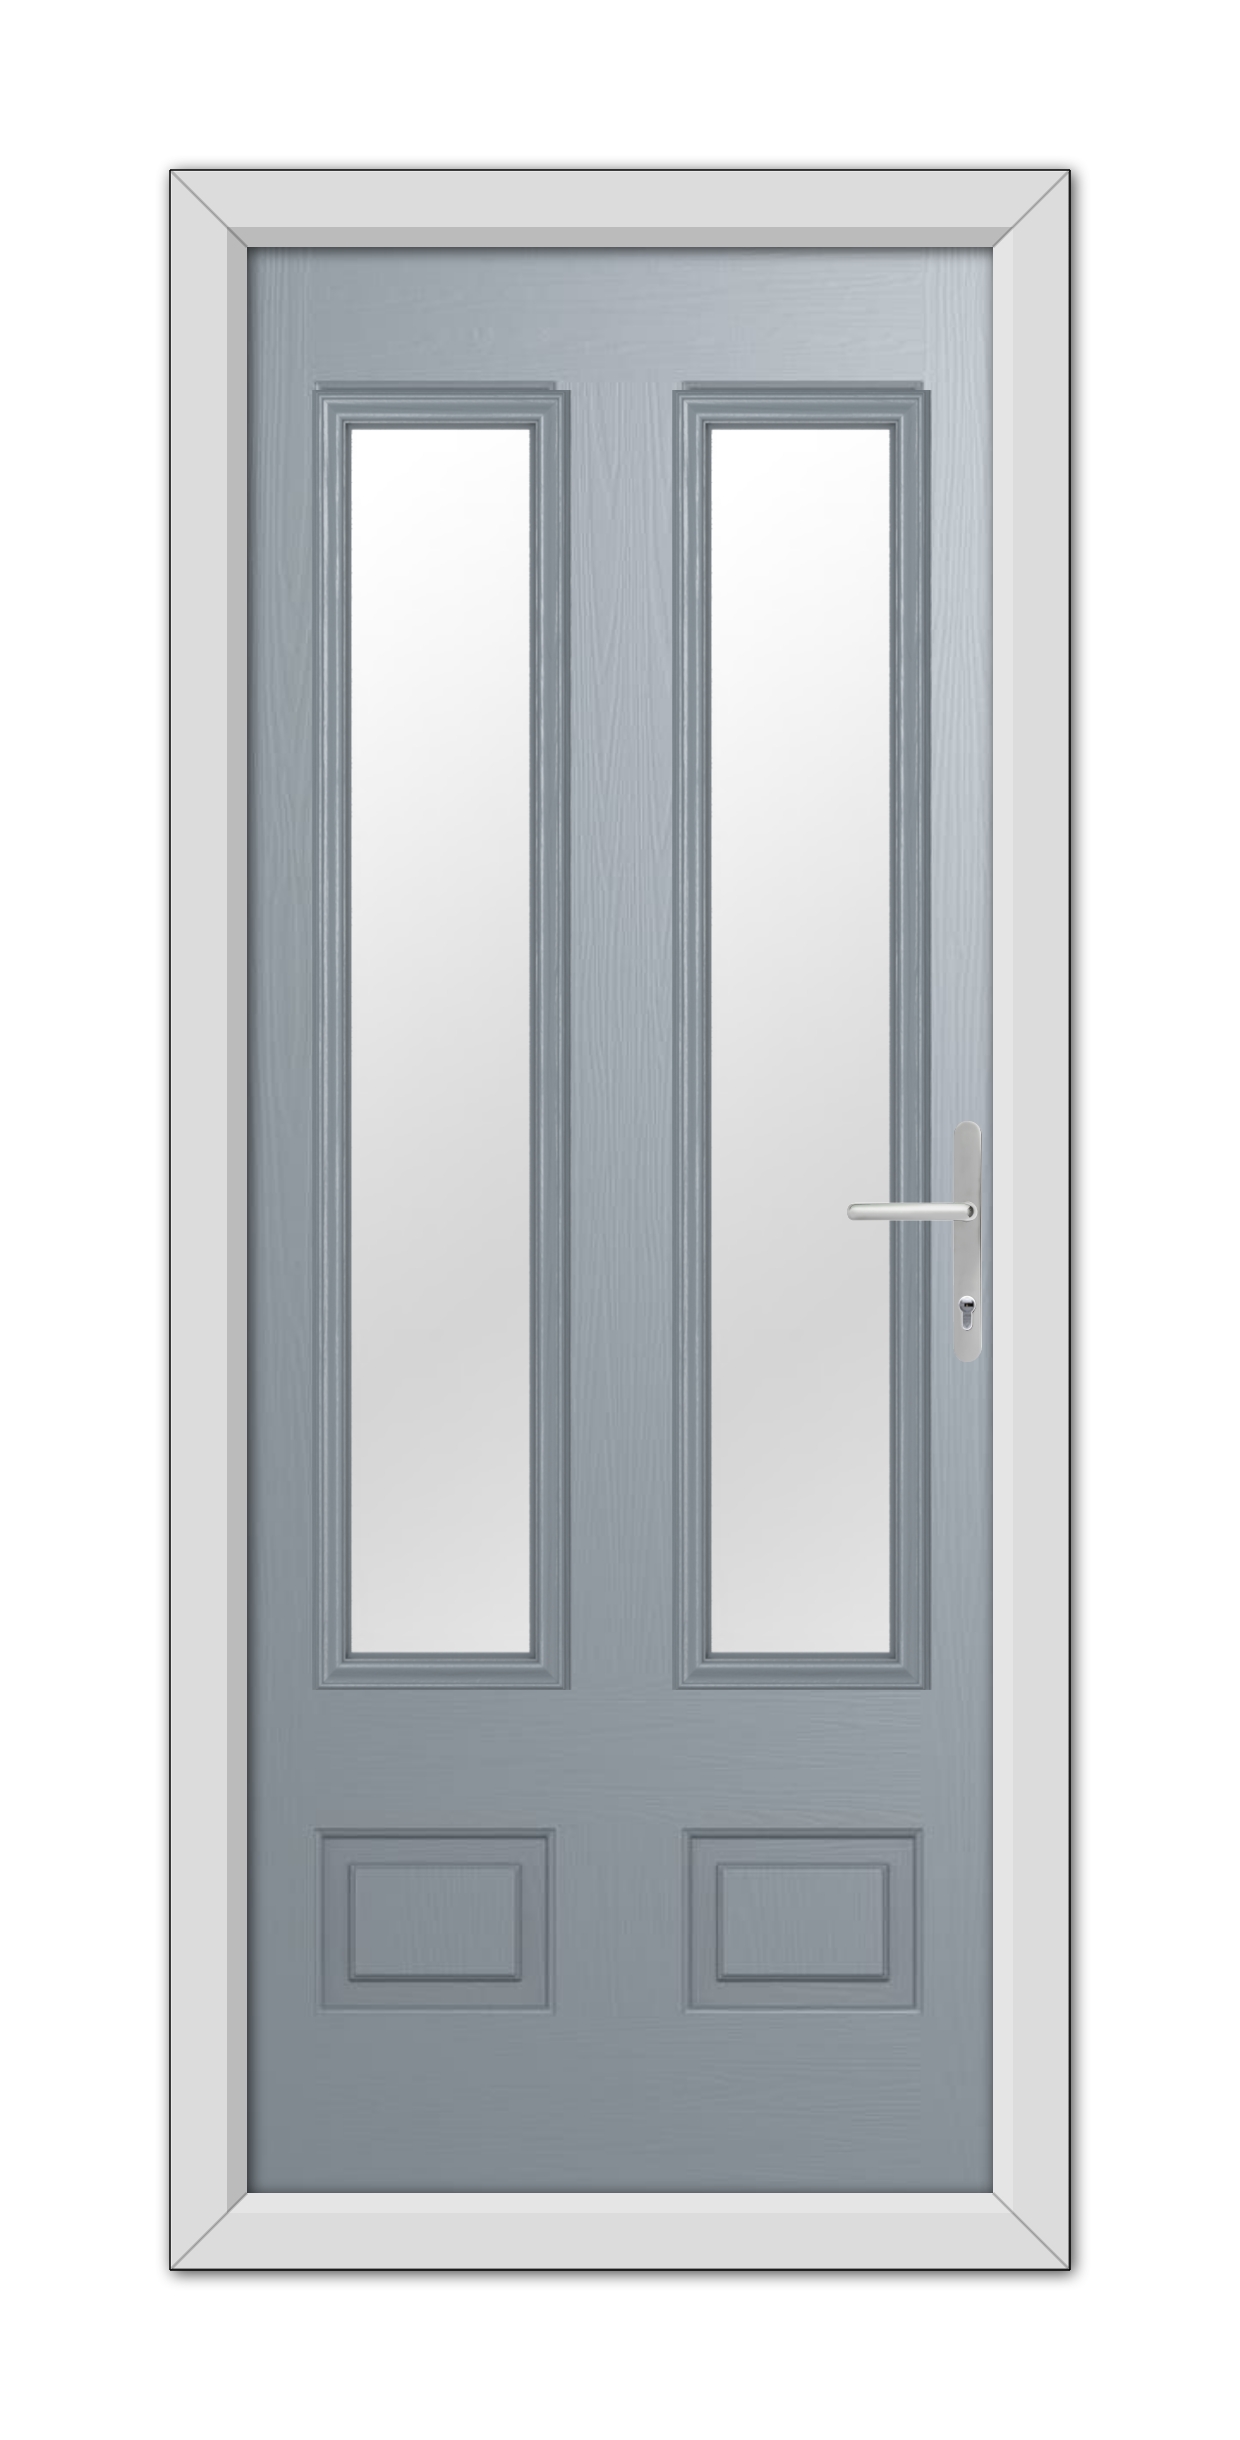 A modern French Grey Aston Glazed 2 Composite Door 48mm Timber Core with white trim, featuring vertical rectangular windows and a metallic handle on the right.